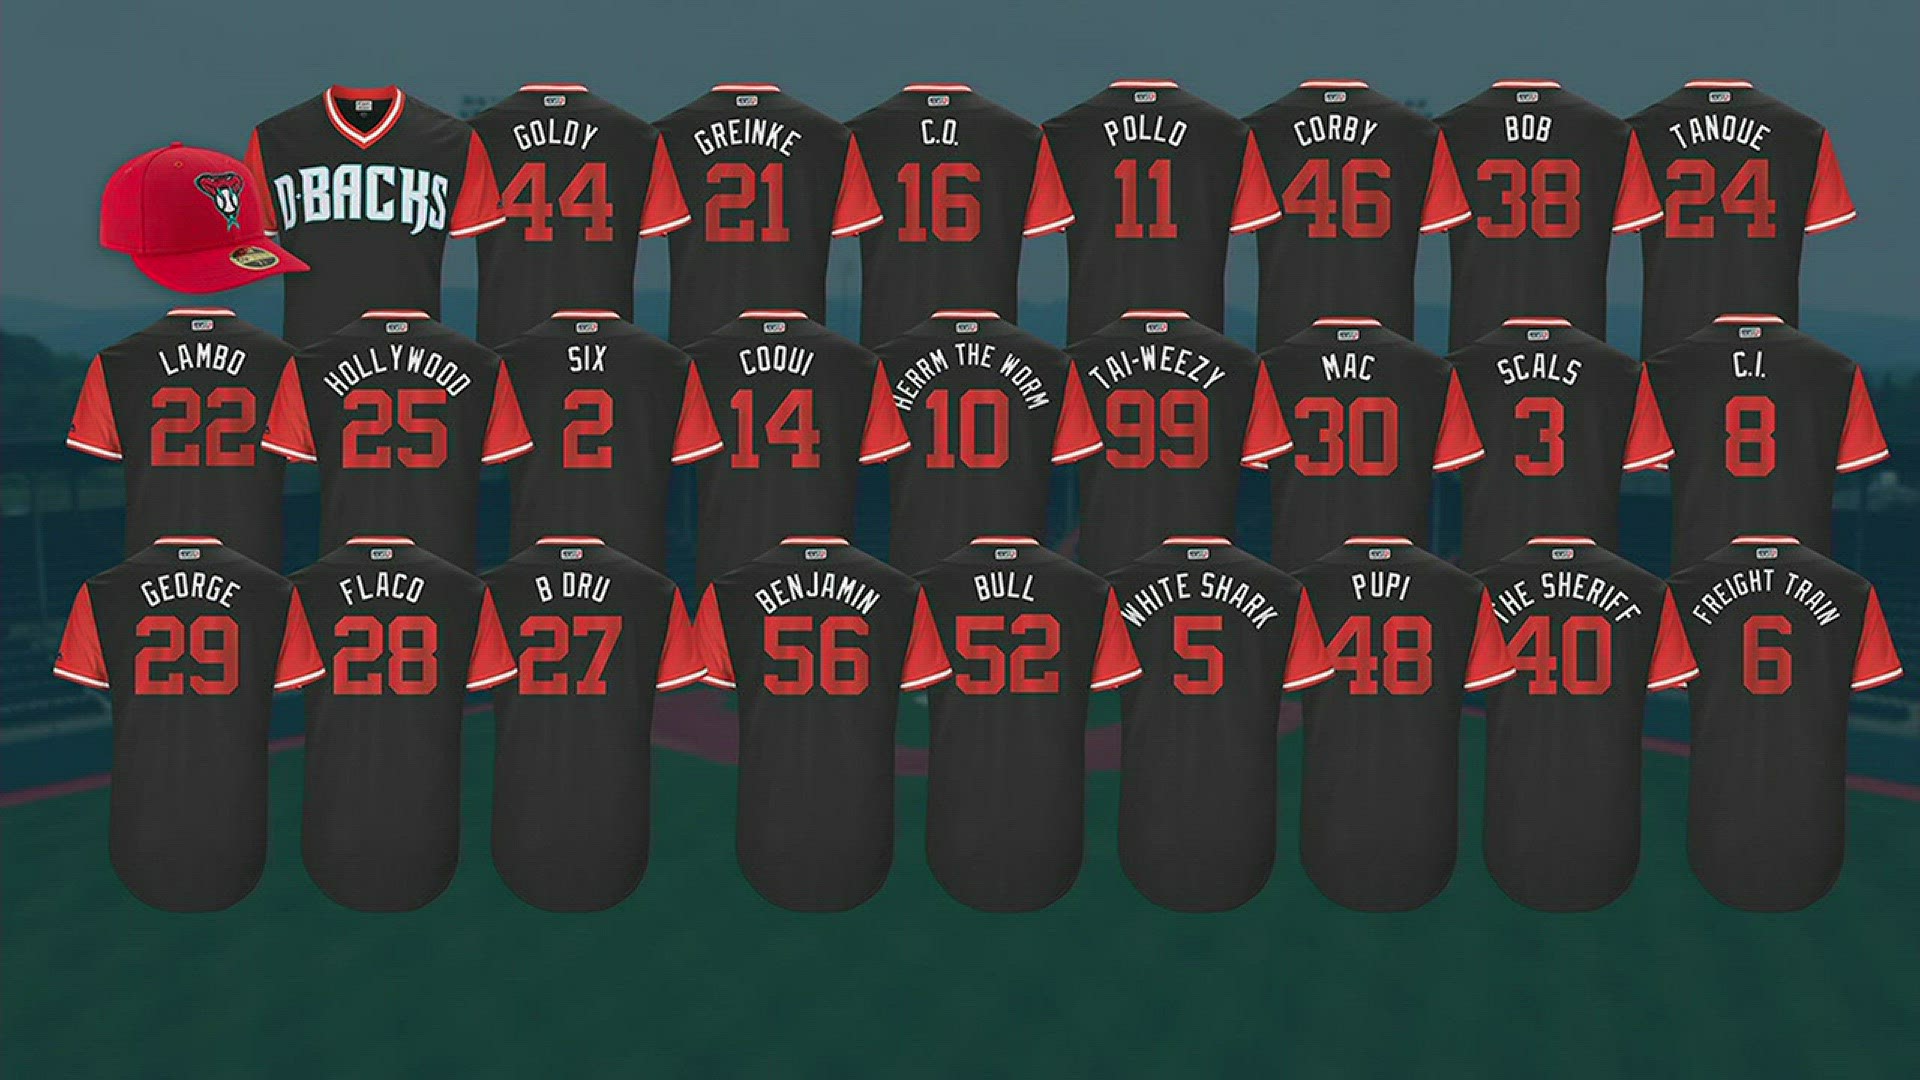 MLB players can wear nicknames on their jerseys for one weekend